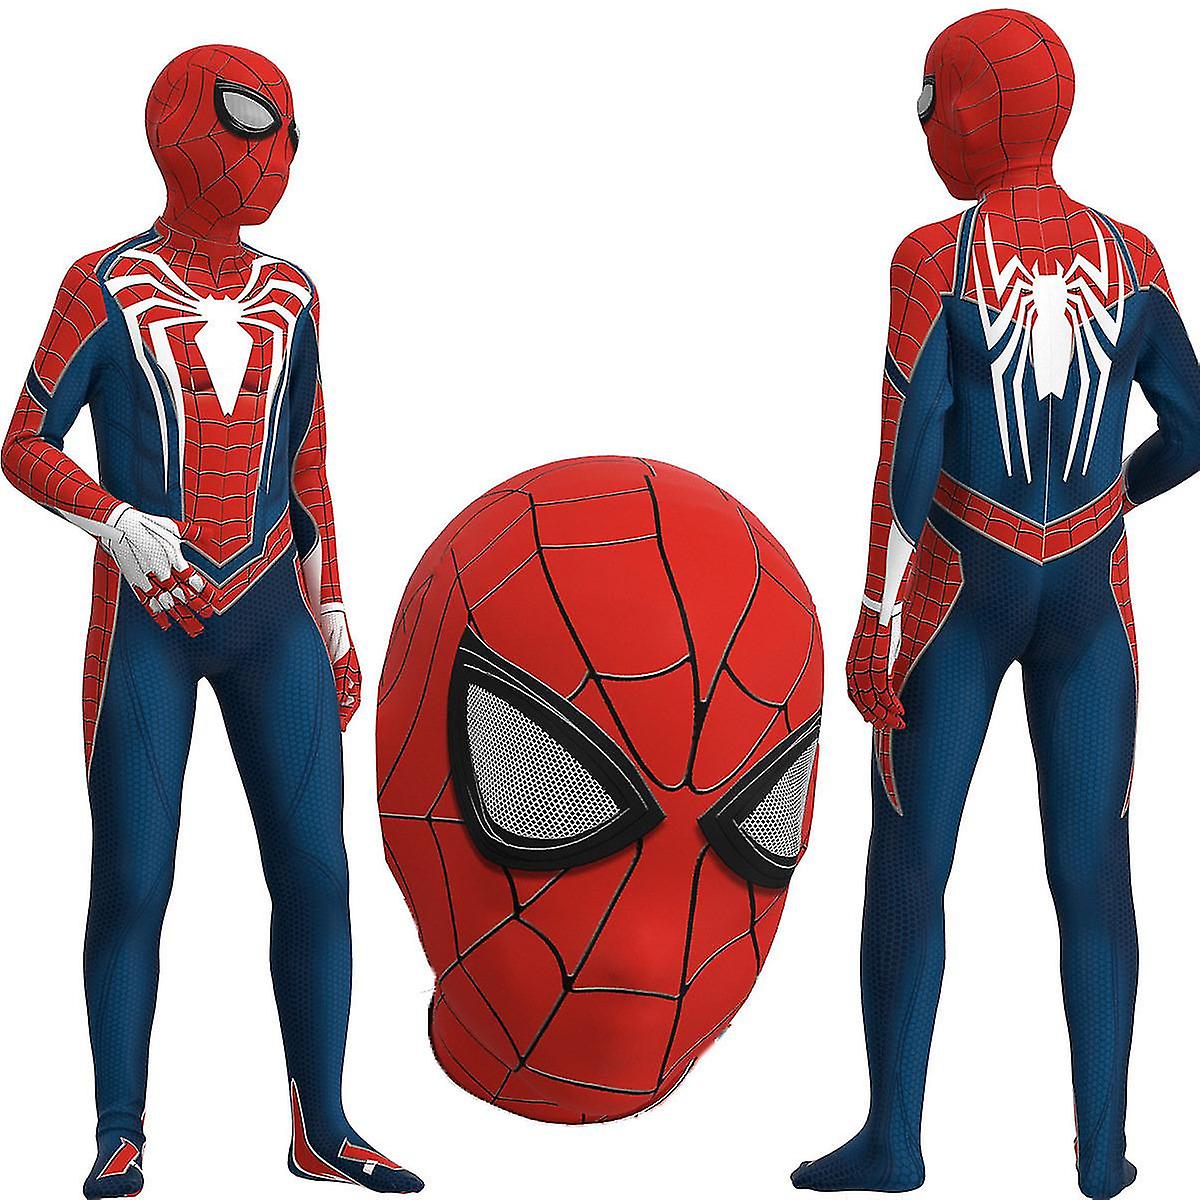 I just bought a Spider-Man costume for my son for his upcoming 3rd birthday on October 14th 🙏